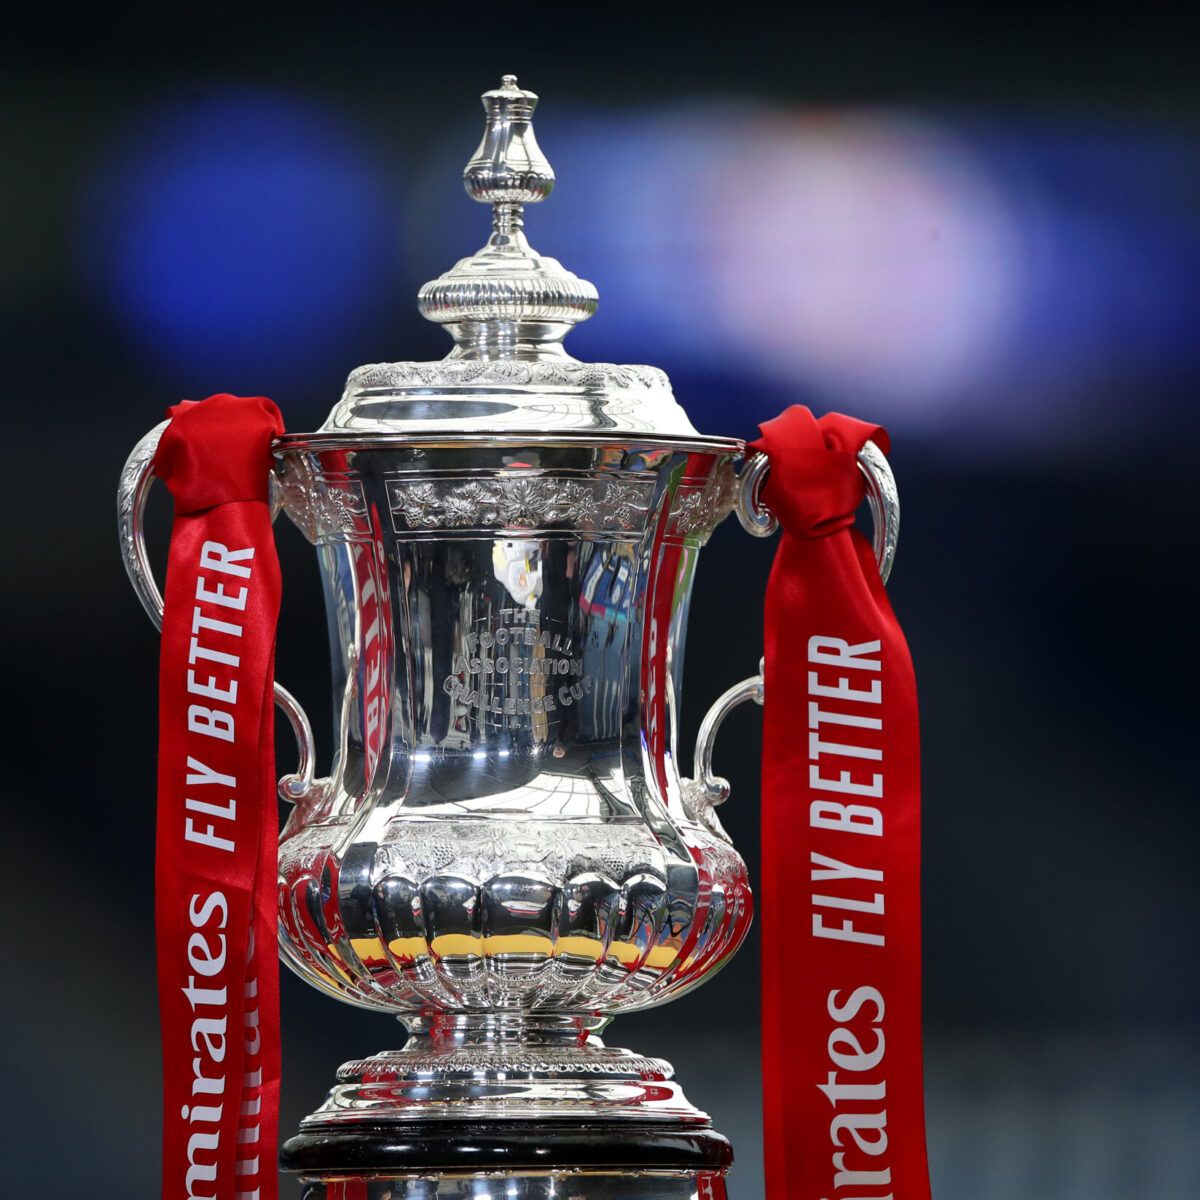 FA Cup Trophy is one of the most valuable football trophies in the world